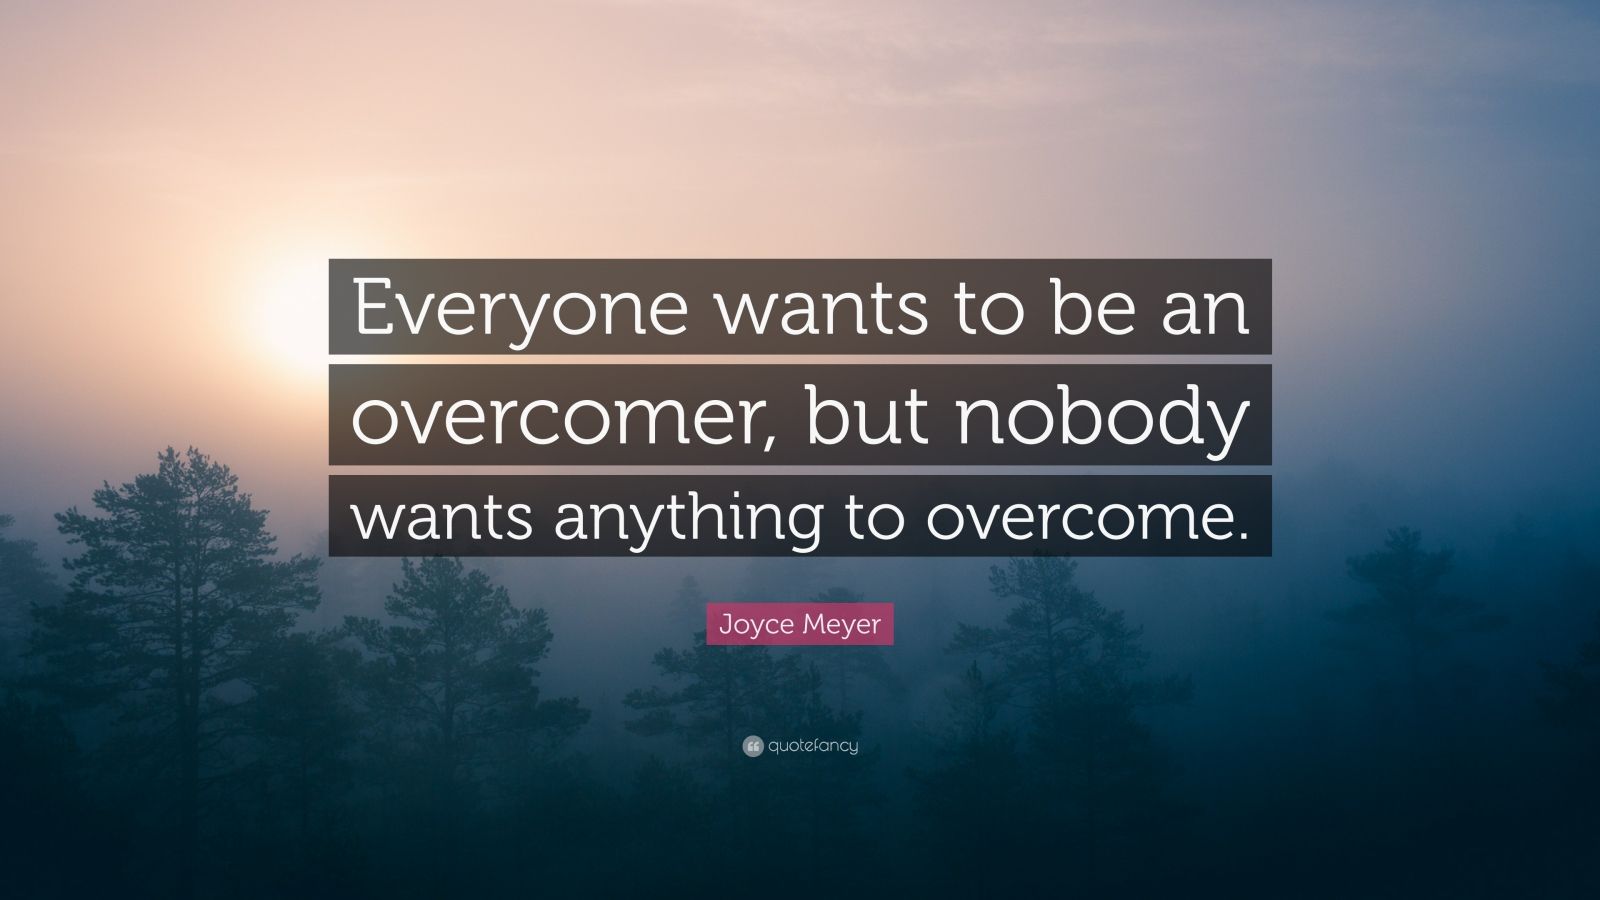 Joyce Meyer Quote: “Everyone wants to be an overcomer, but nobody wants ...